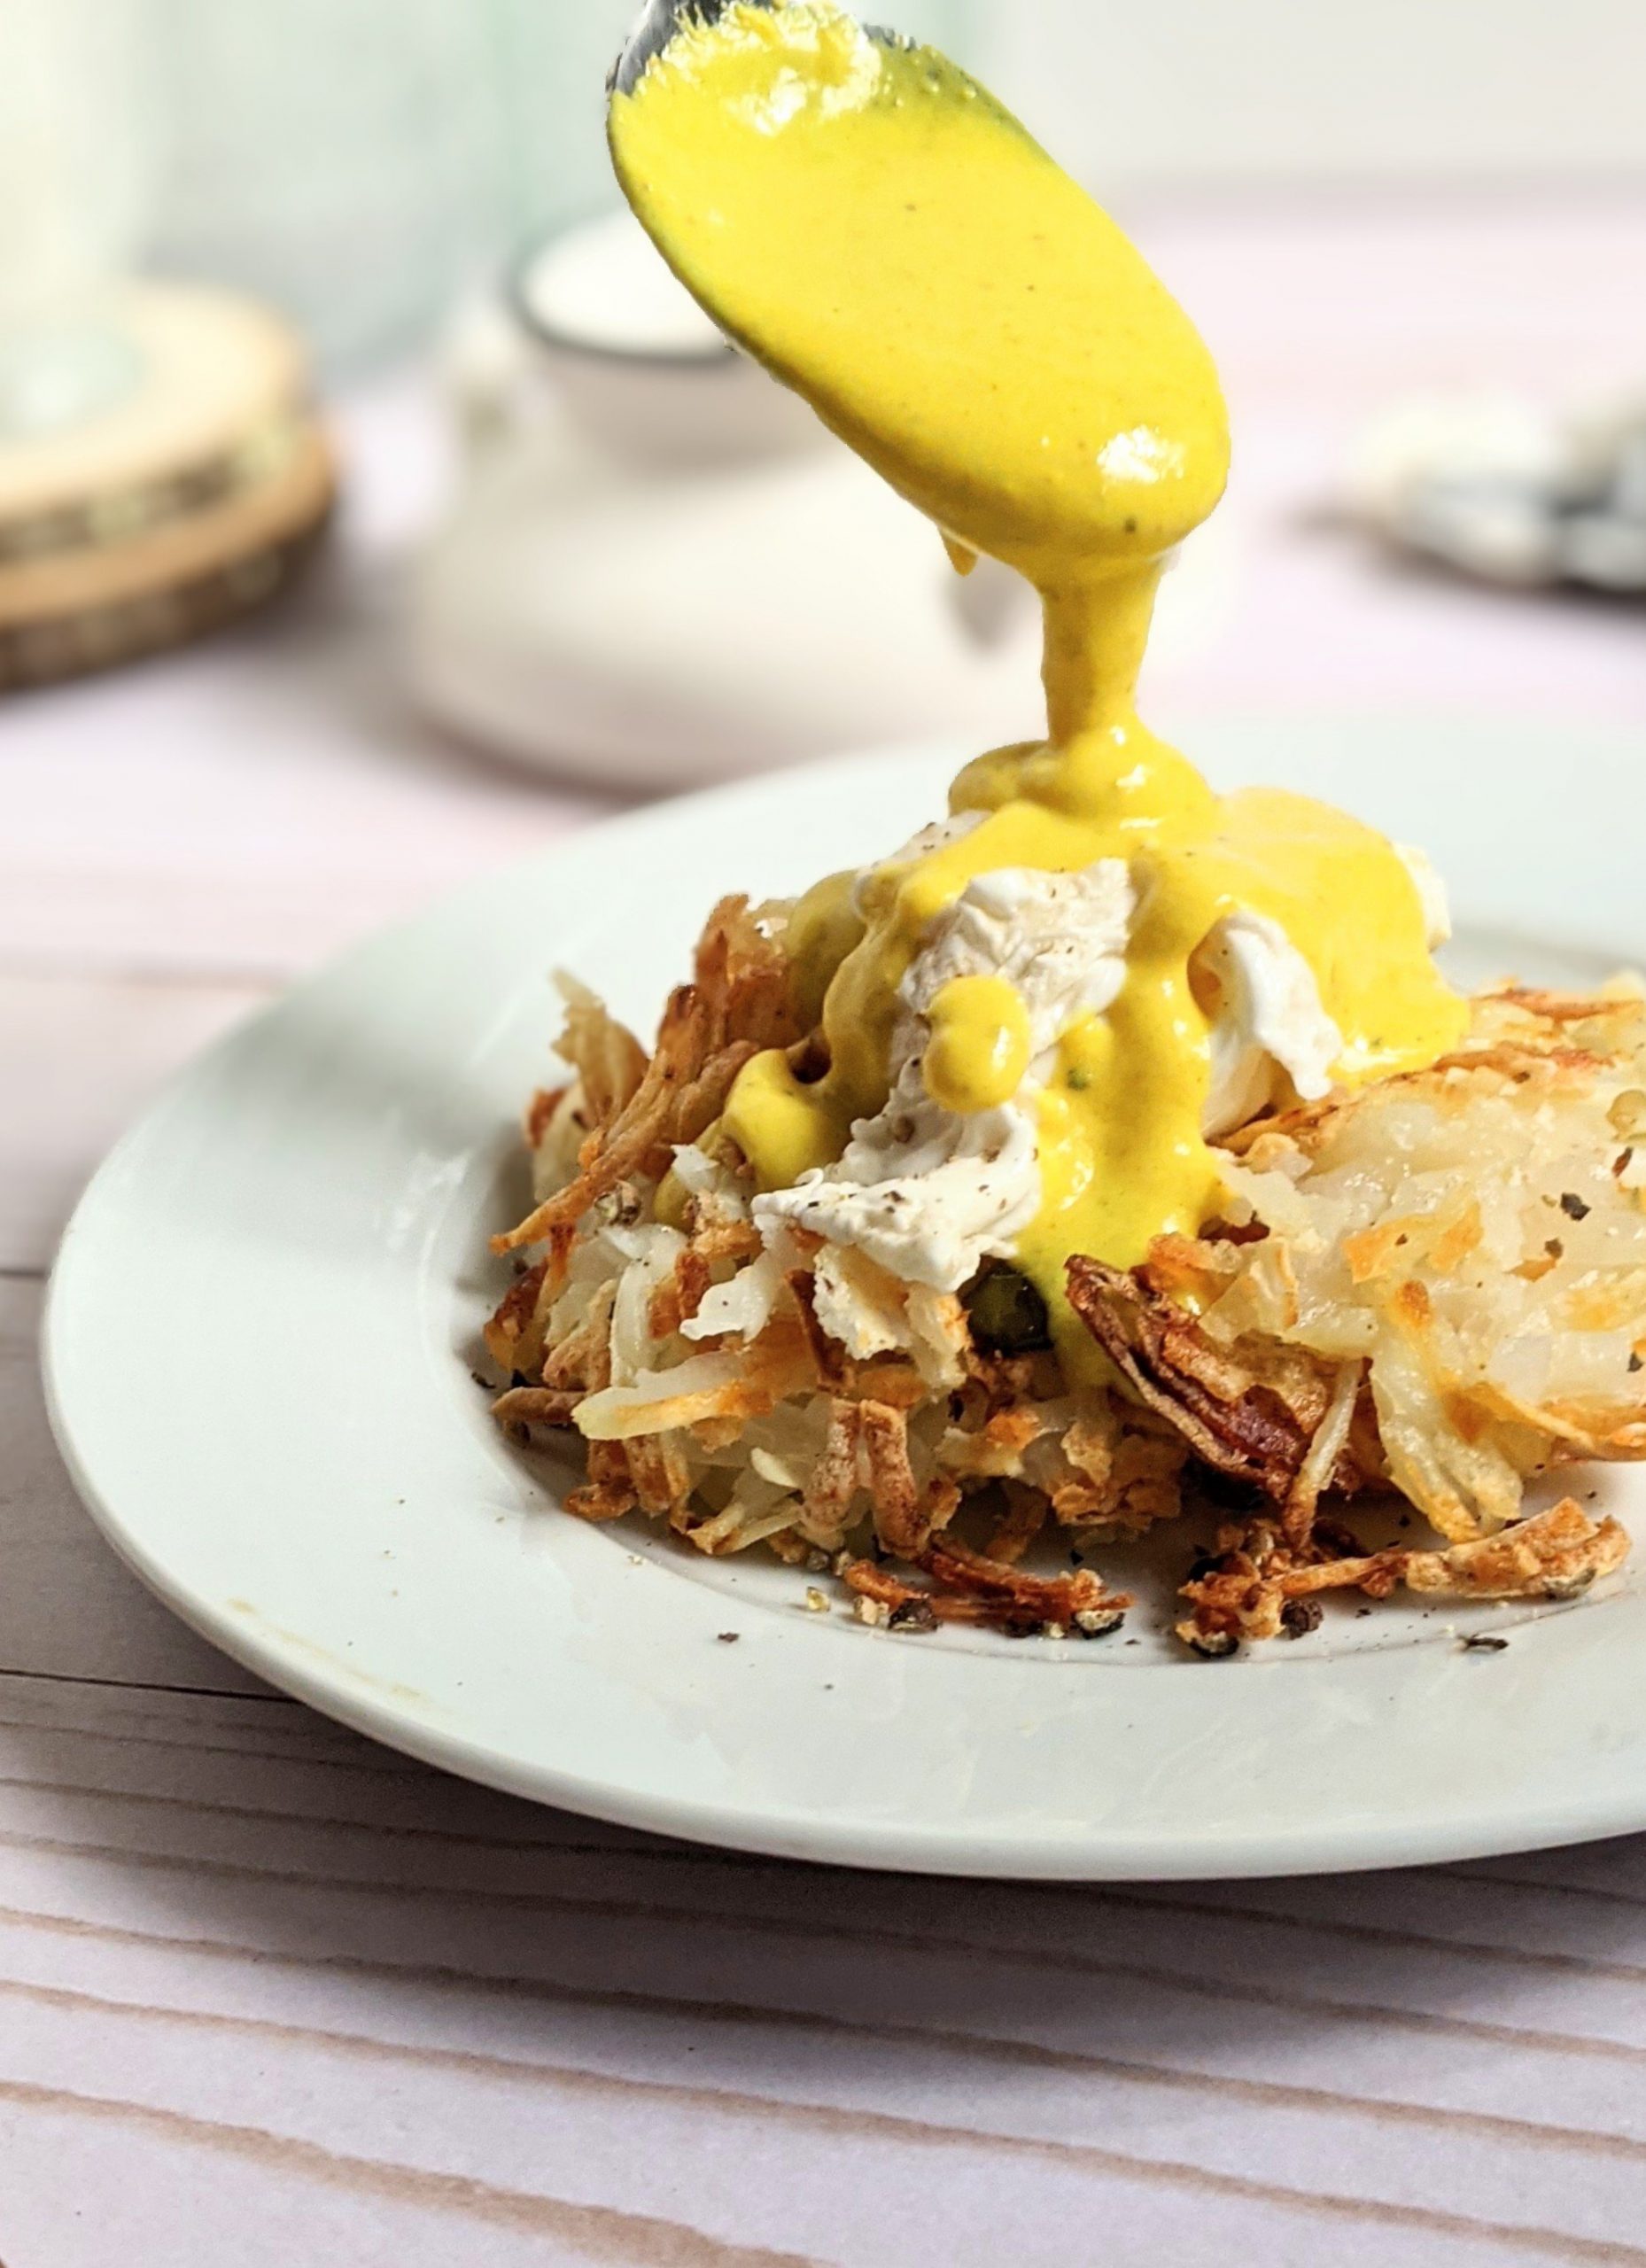 gluten free eggs benedict with hash browns potato egg benedict recipe without bread healthy fun eggs benedict non traditional recipes for breakfast and brunch store bought hollandaise sauce